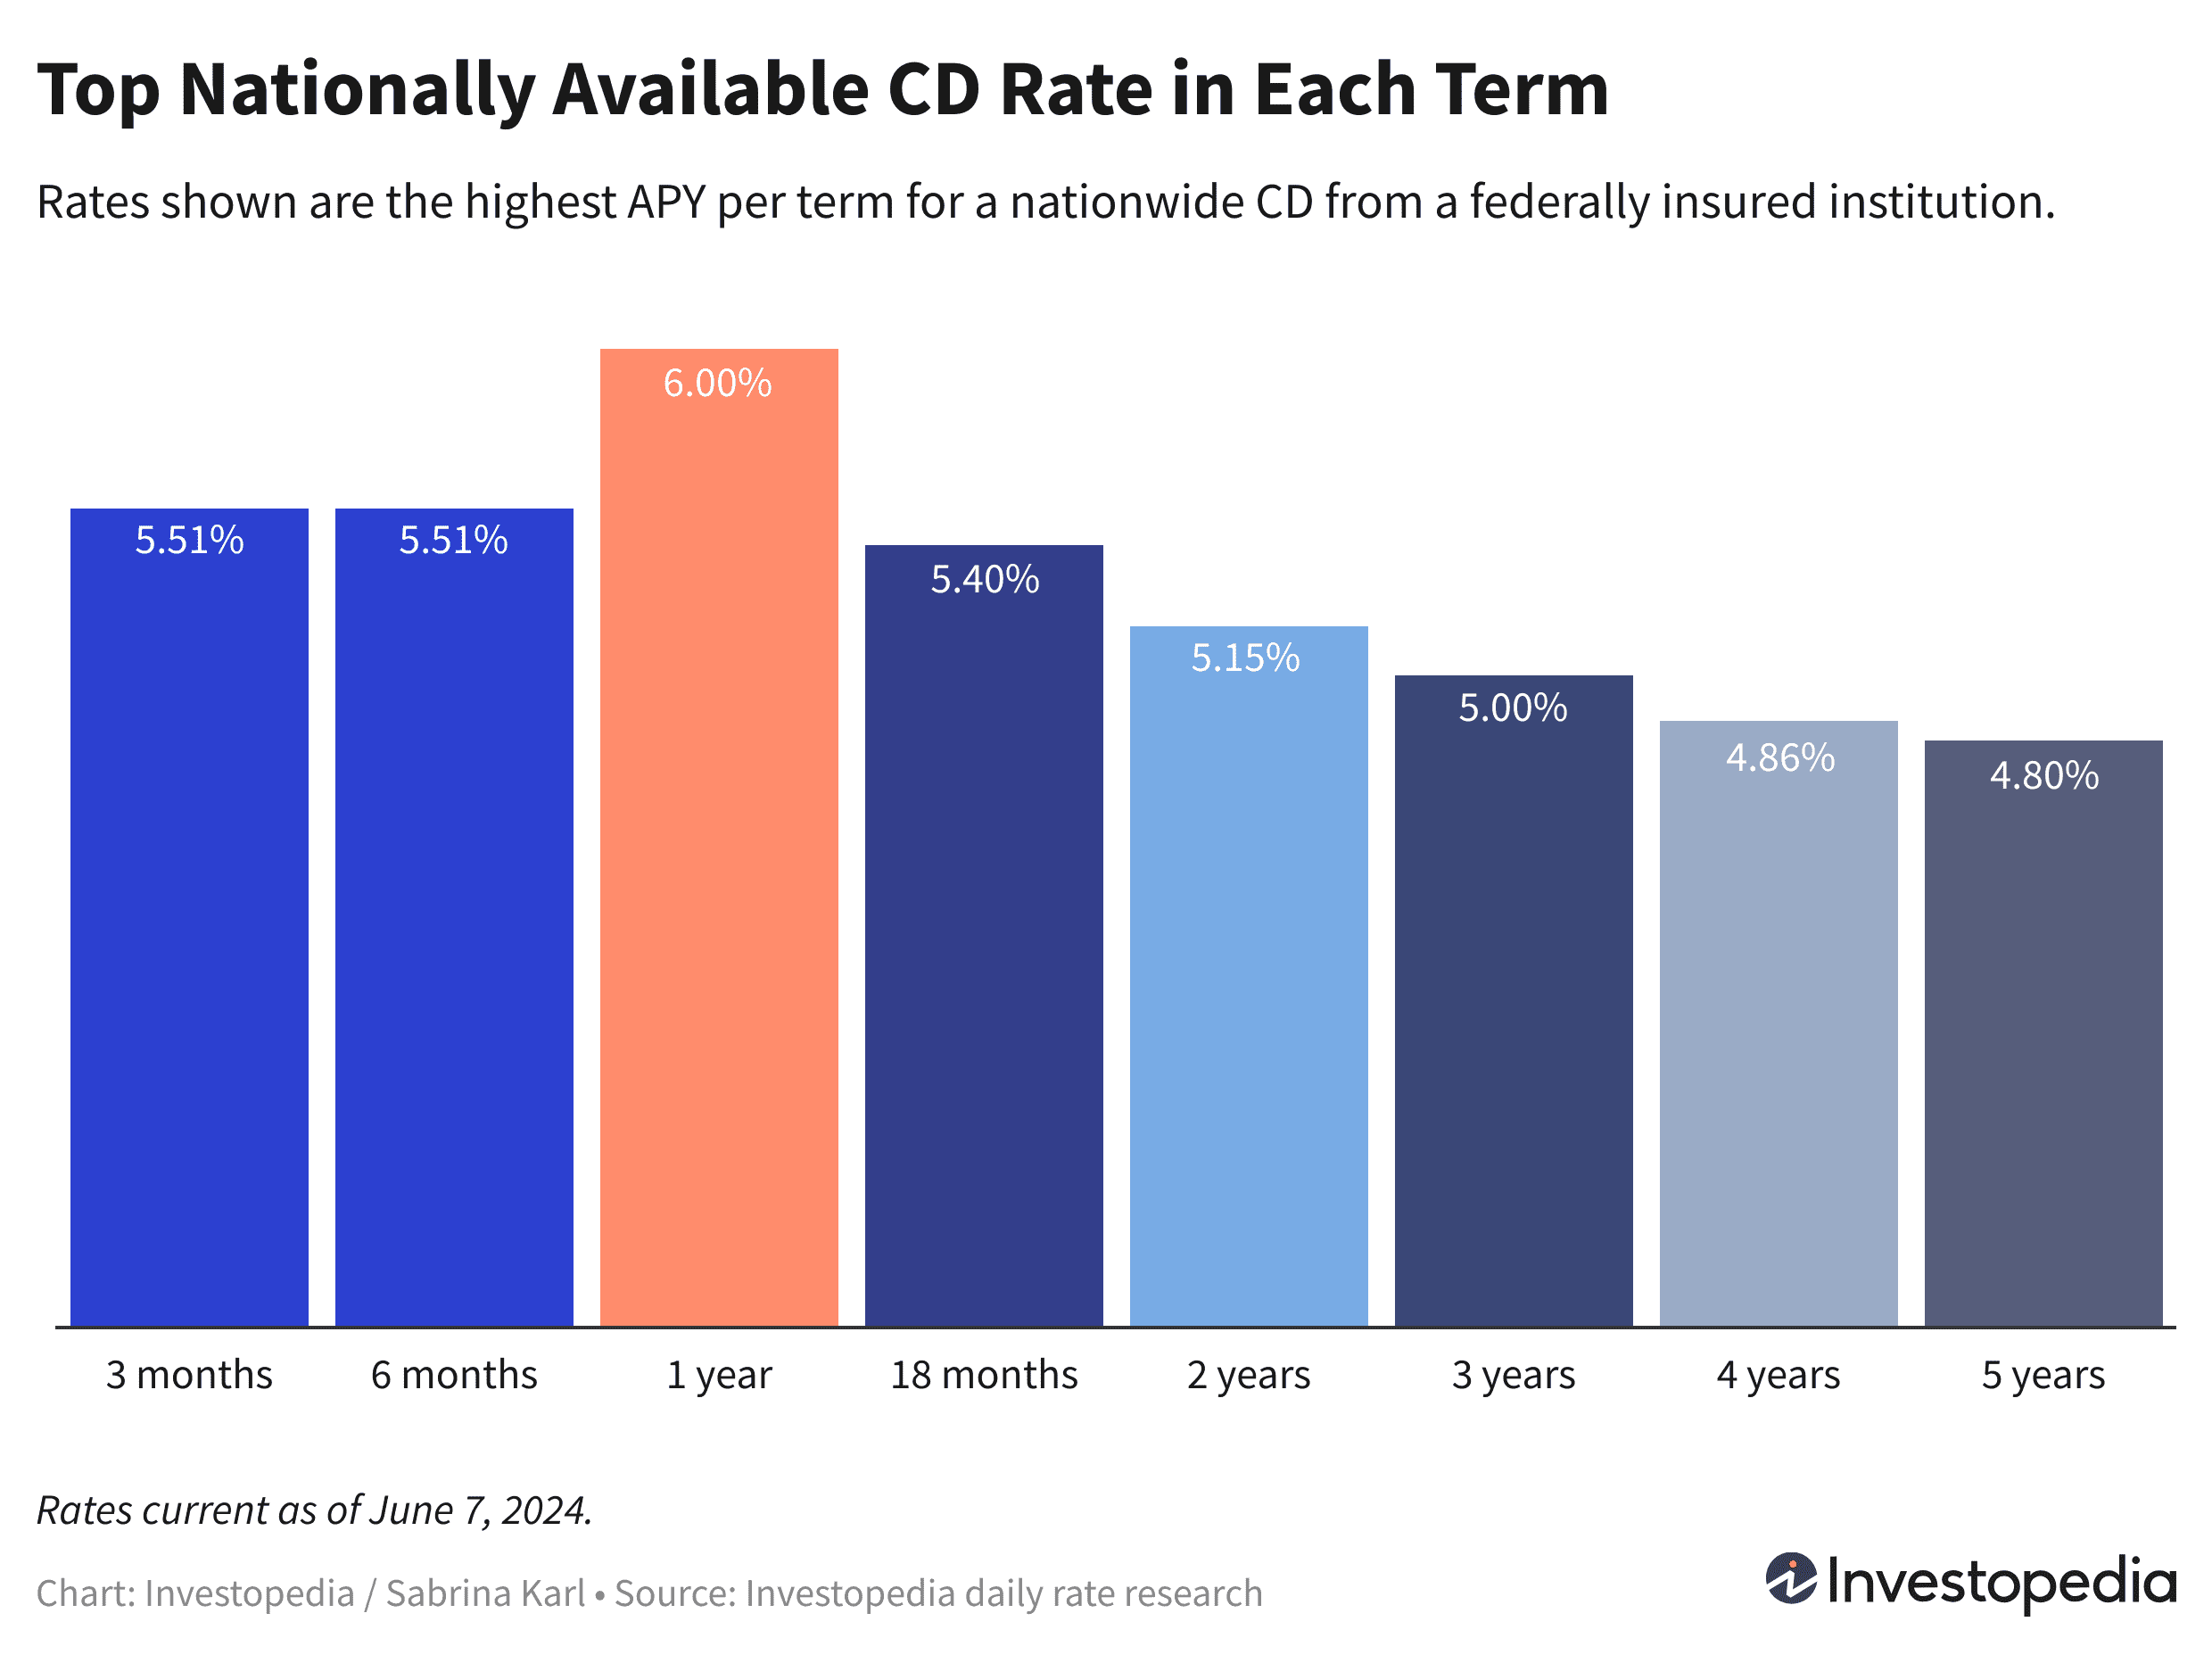 Top nationwide CD rate in each term, ranging from 4.80% to 6.00%, current as of June 7, 2024.